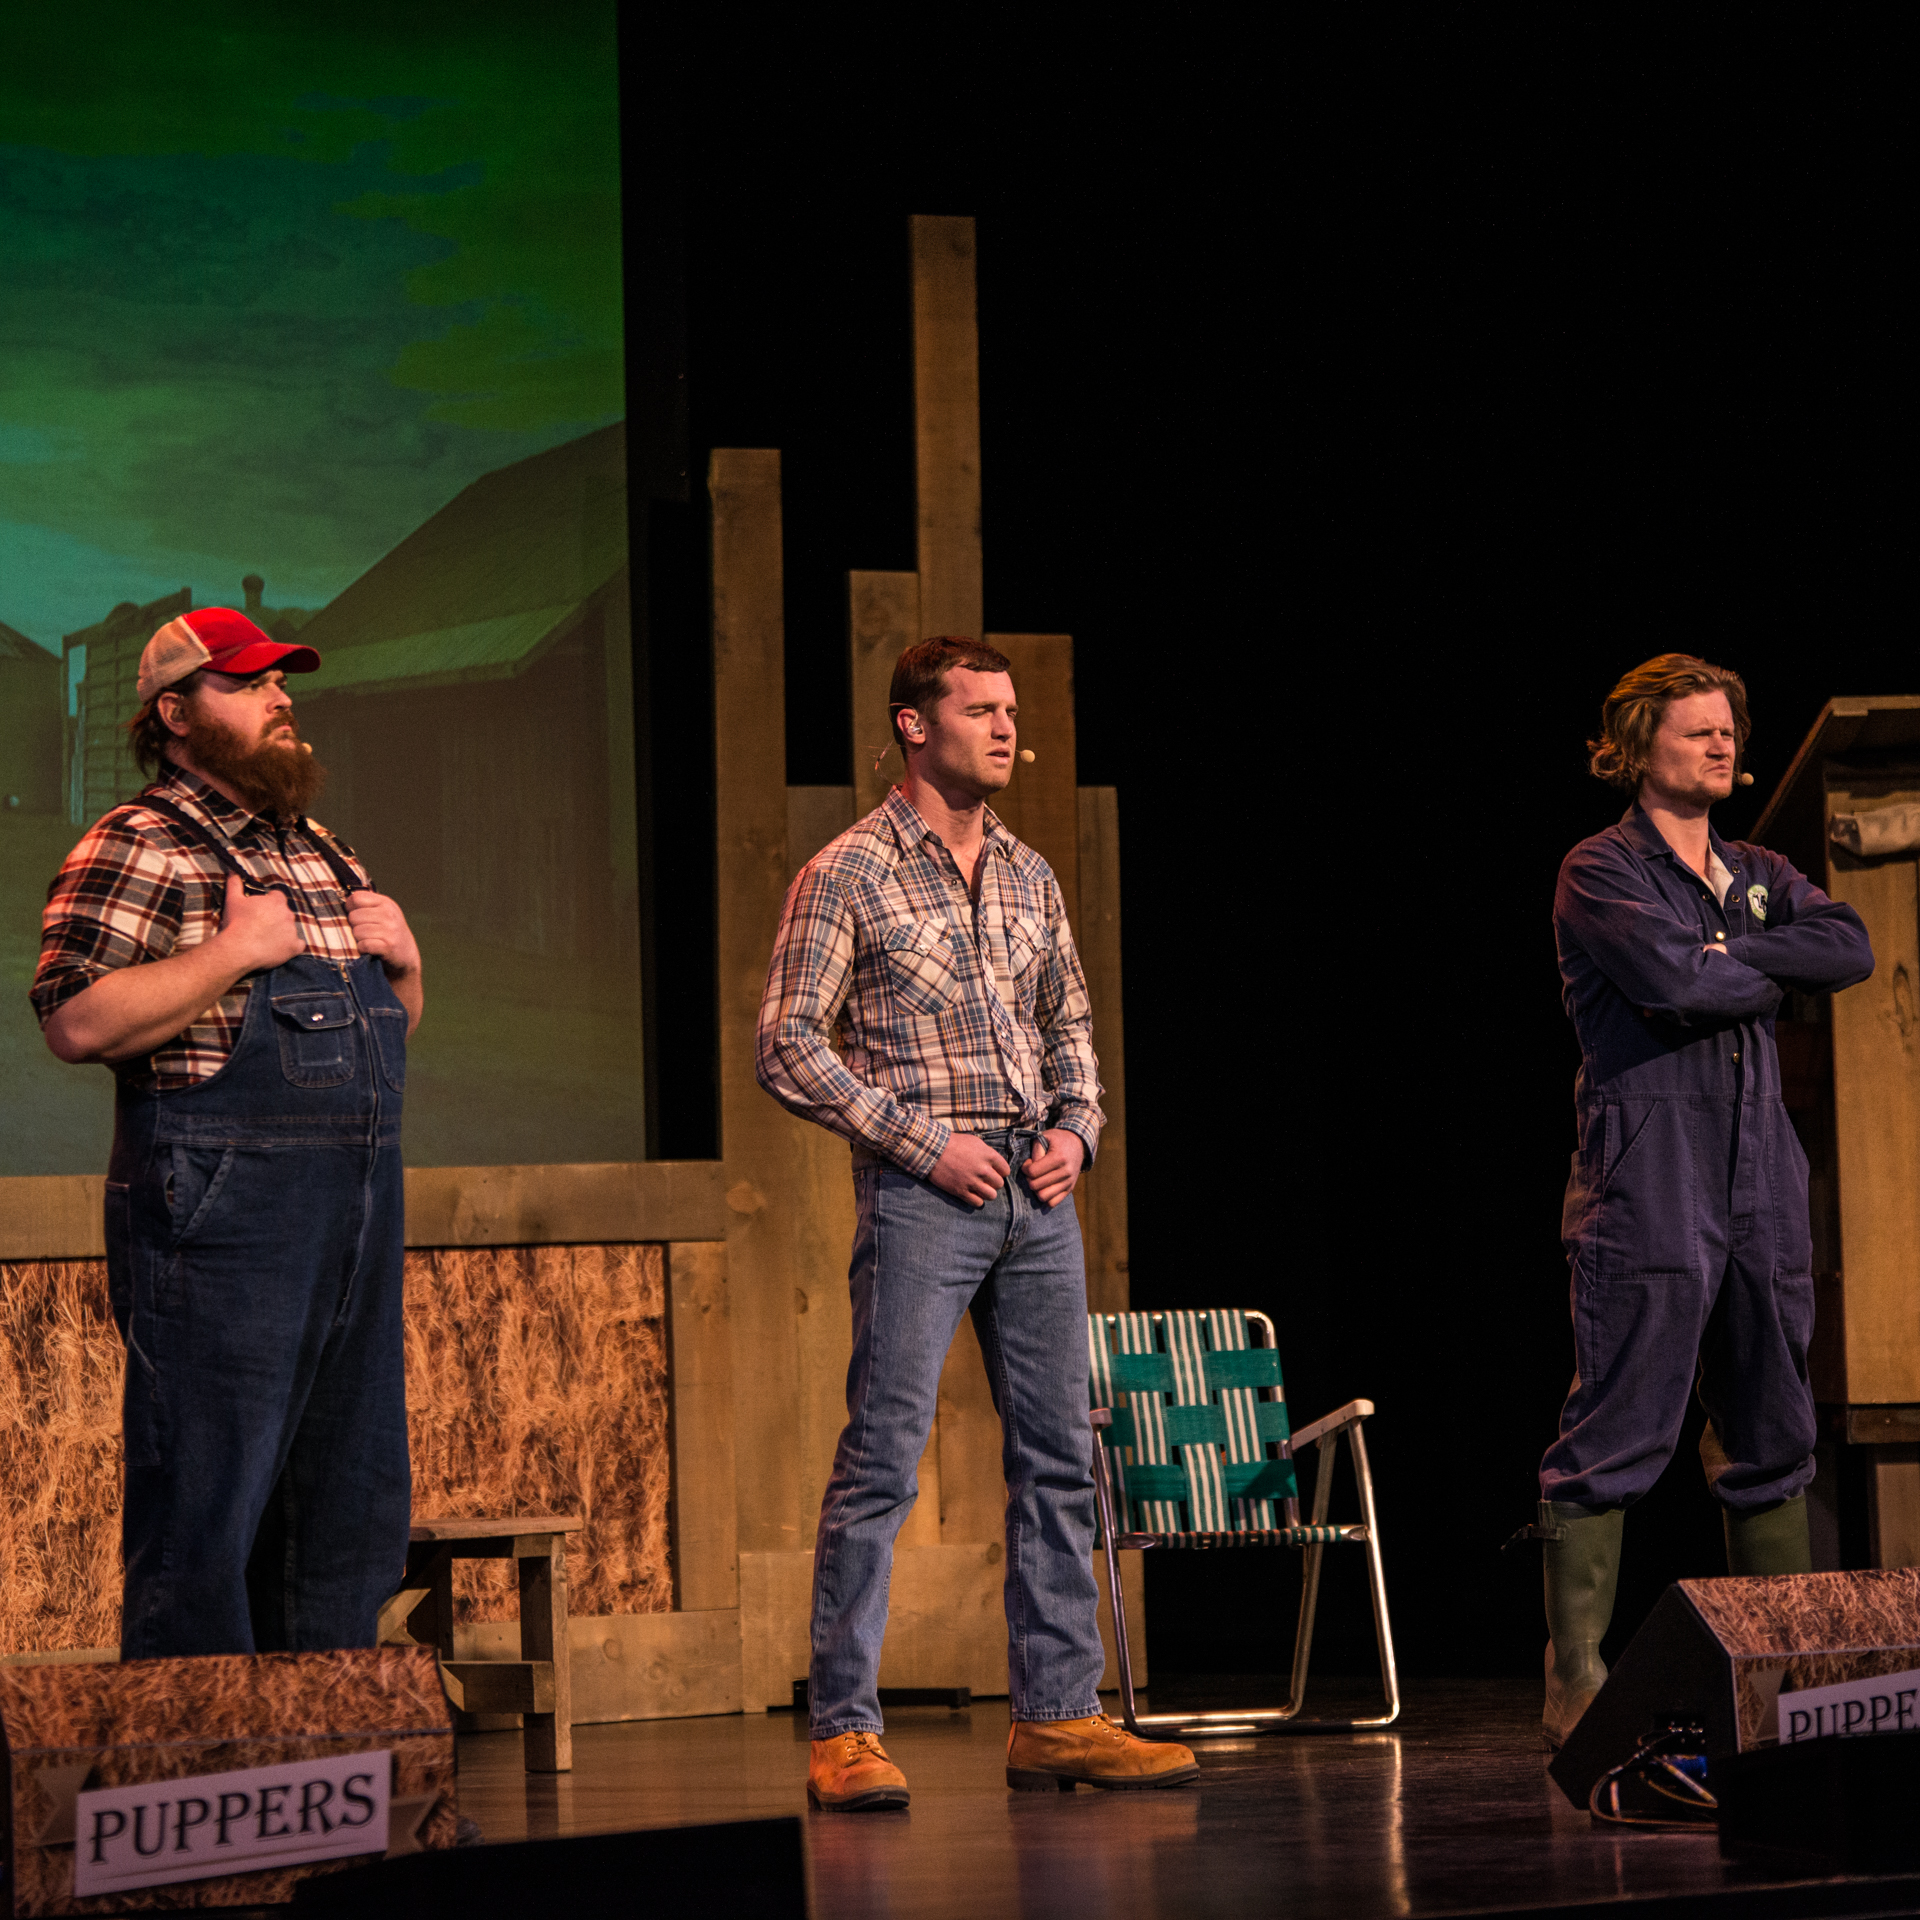 Jared Keeso takes center stage, gripping the front loops of his blue jeans, flanked by Nathan Dales on the right, arms folded, and K. Trevor Wilson on the left, clutching the straps of his overalls. The backdrop features hay, a green folding chair, and the foreground is adorned with a Puppers sign, creating a rustic and visually engaging setting for their performance.